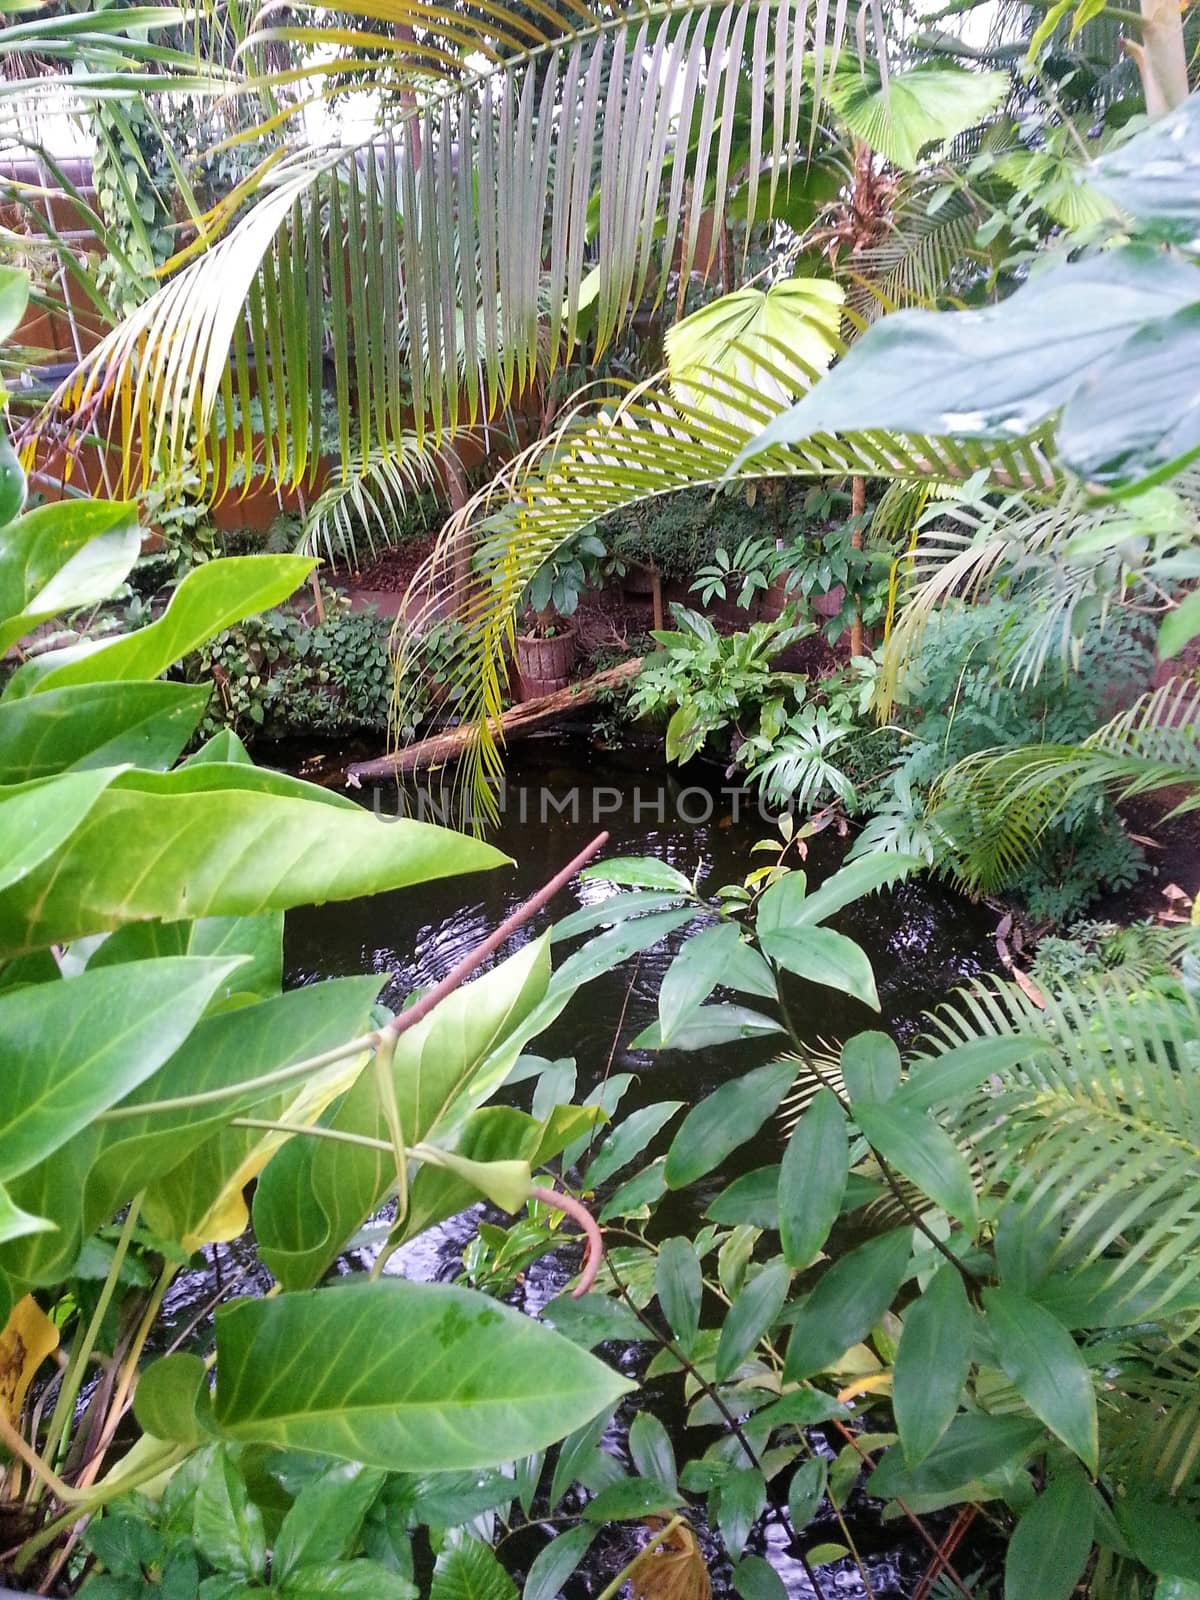 Jungle in the botanical garden of Amsterdam by pisces2386